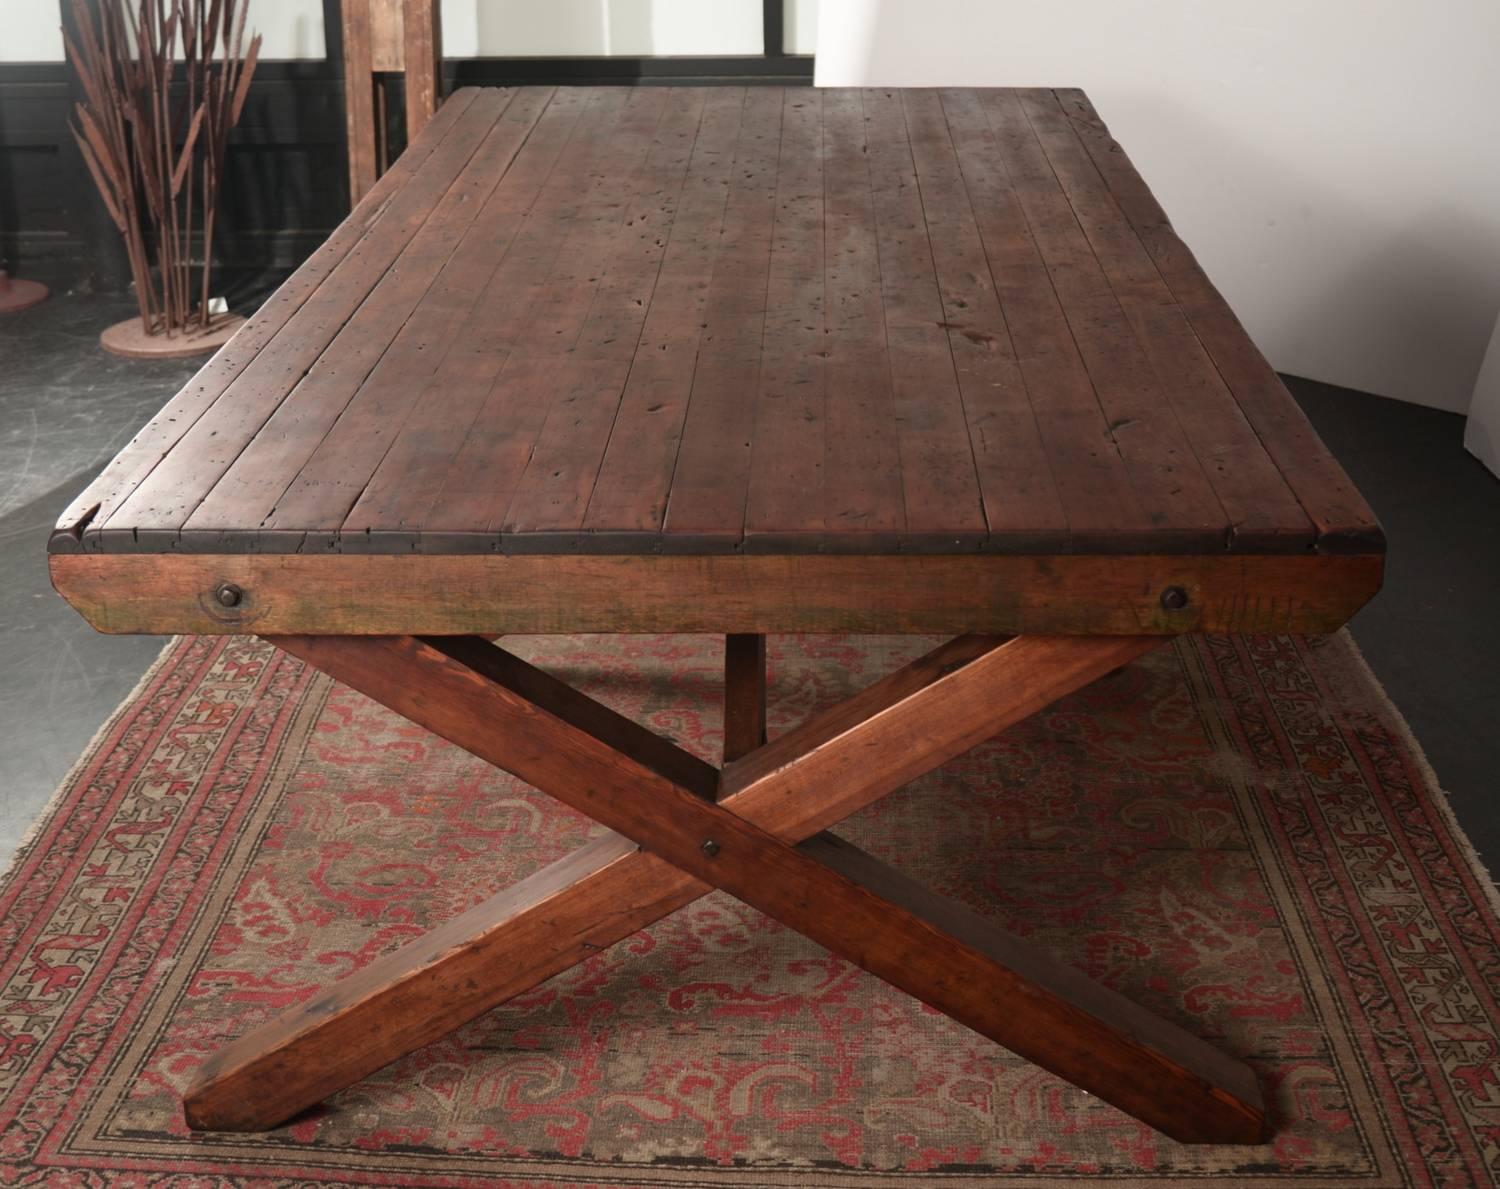 Simple clean lines define this Classic heavy duty Douglas fir early century dining hall table. The X brace leg design allows for excellent chair clearance while maintaining excellent stability.